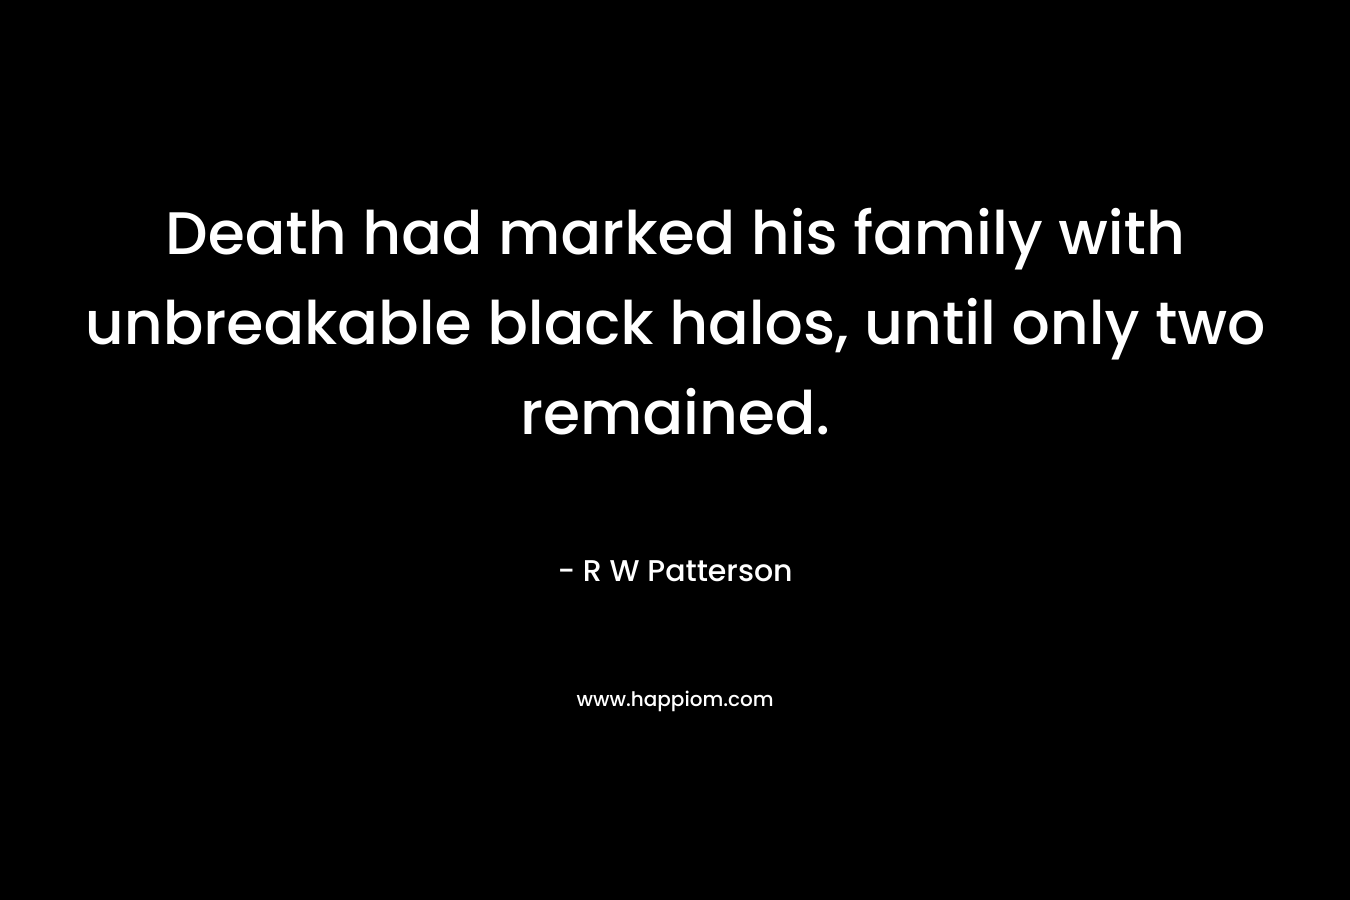 Death had marked his family with unbreakable black halos, until only two remained. – R W Patterson